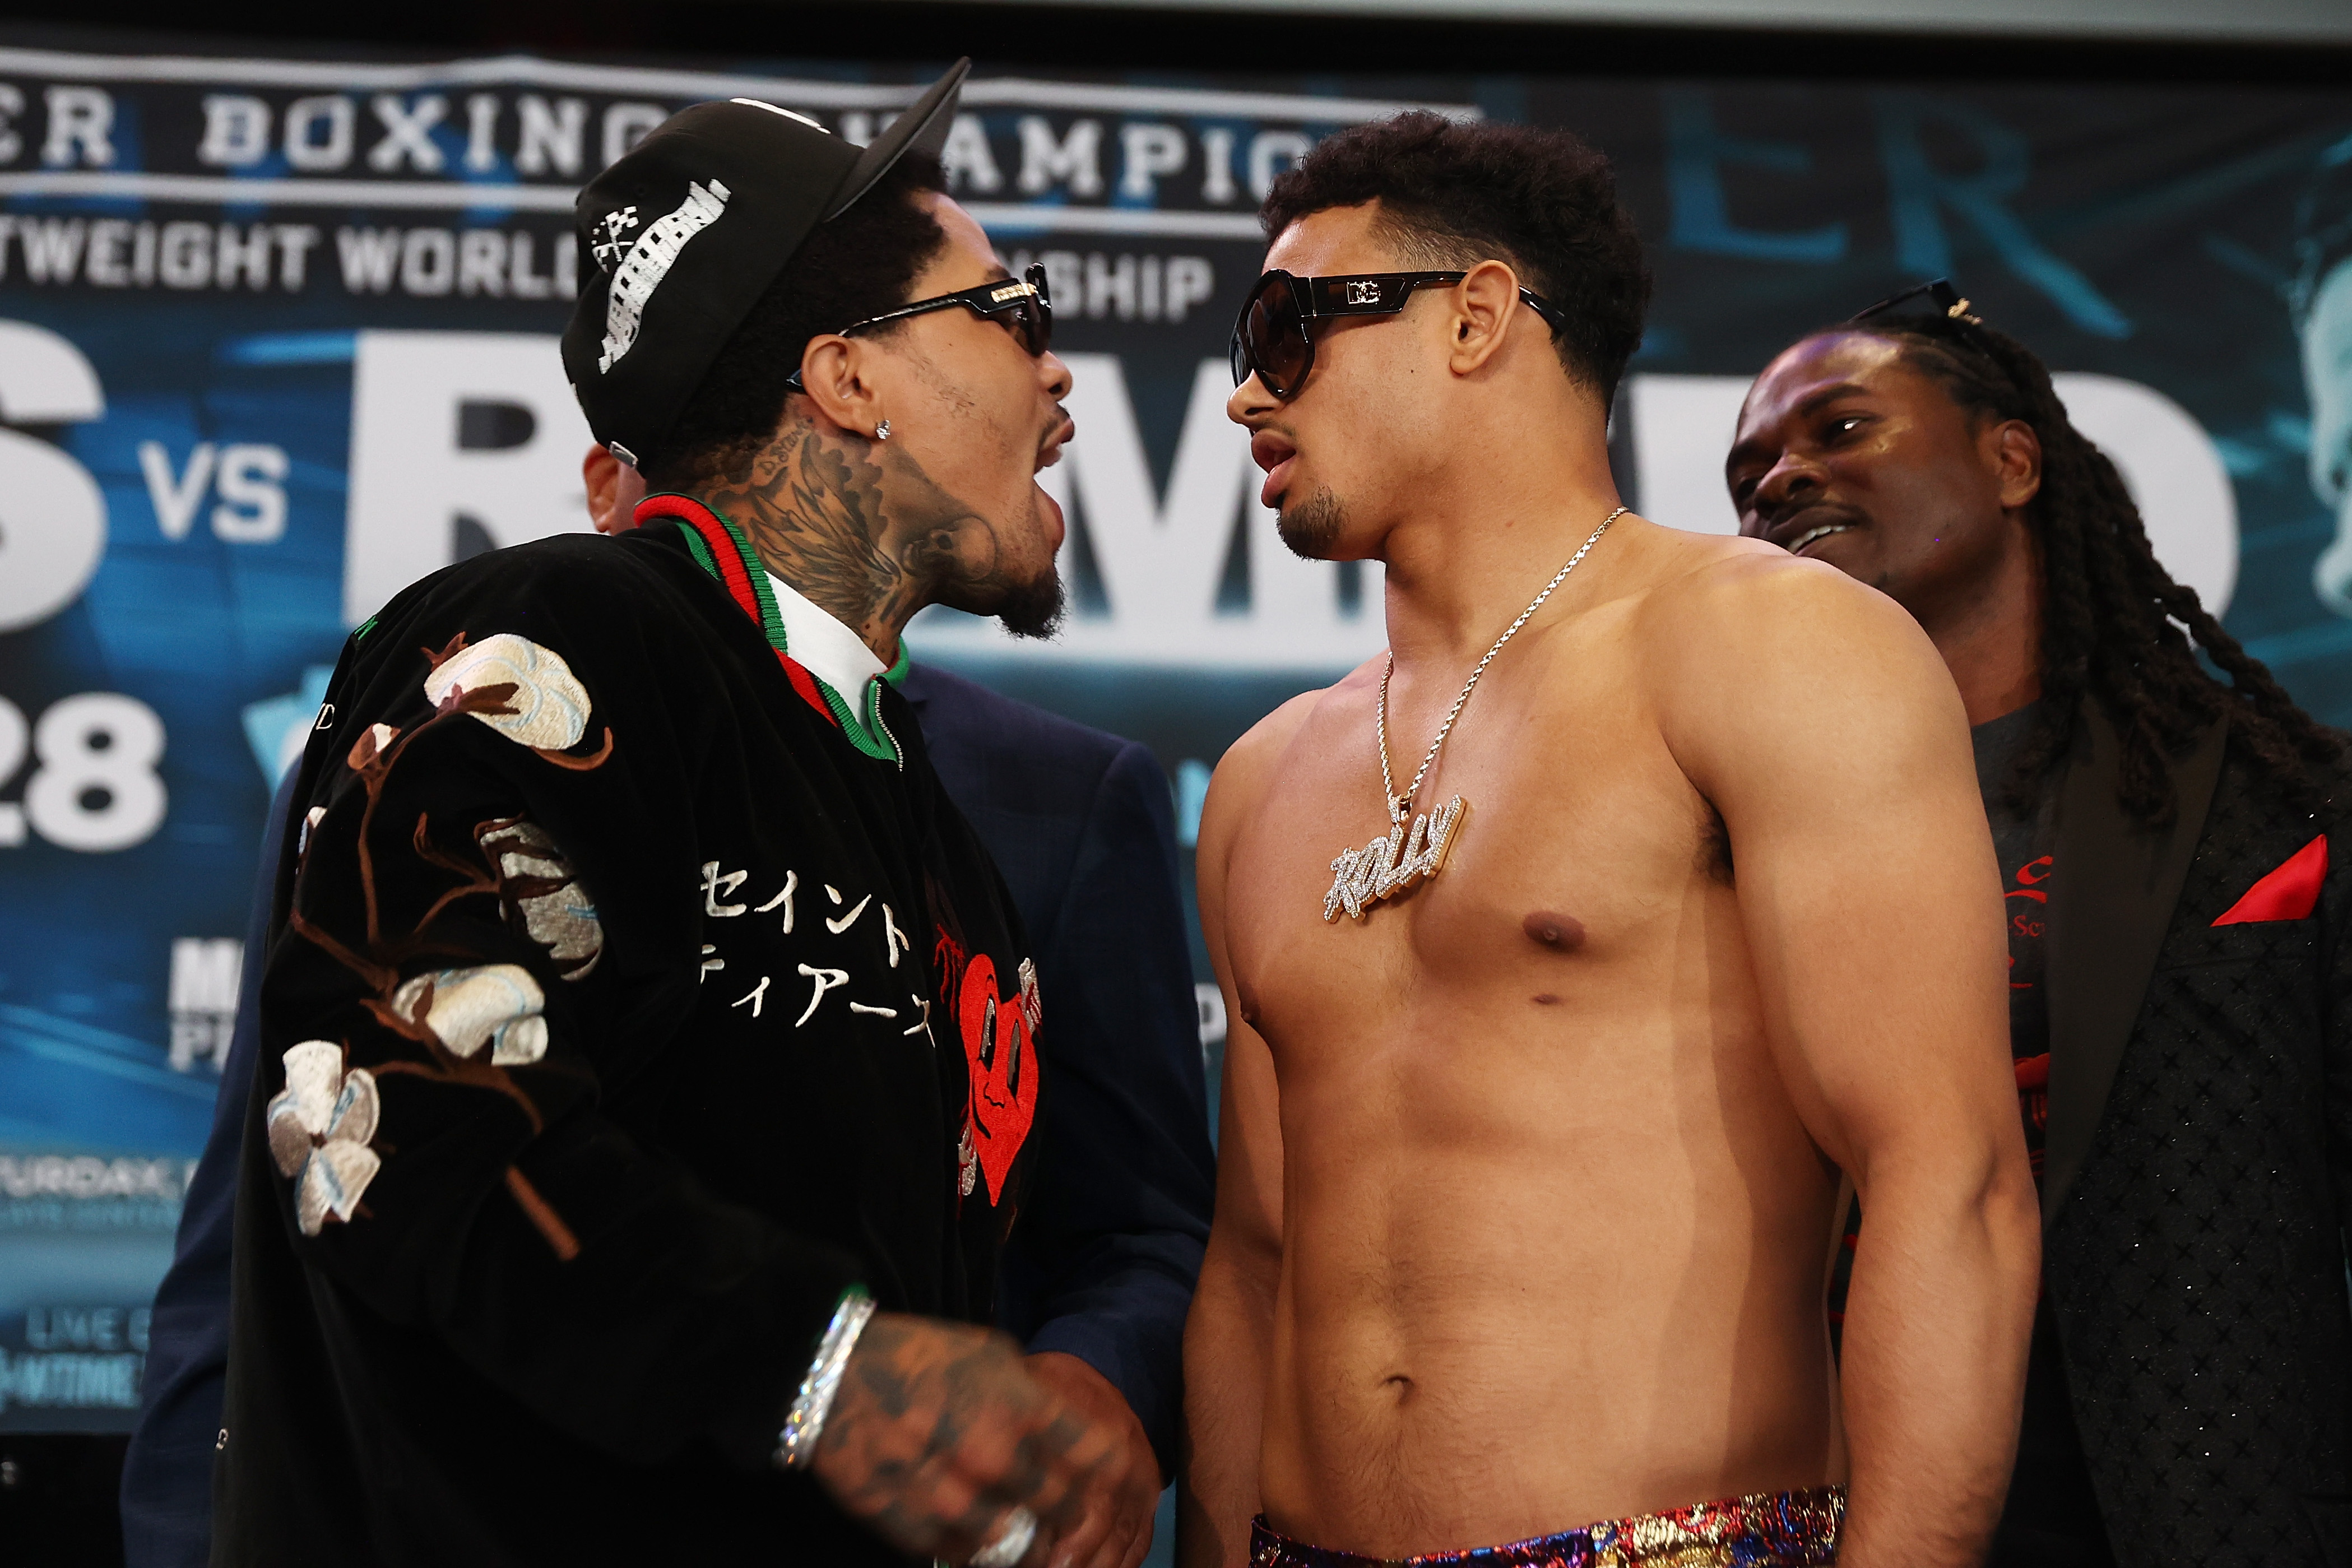 Gervonta Davis faces-off against Rolando Romero during a press conference at Barclays Center on April 07, 2022 in Brooklyn, New York.